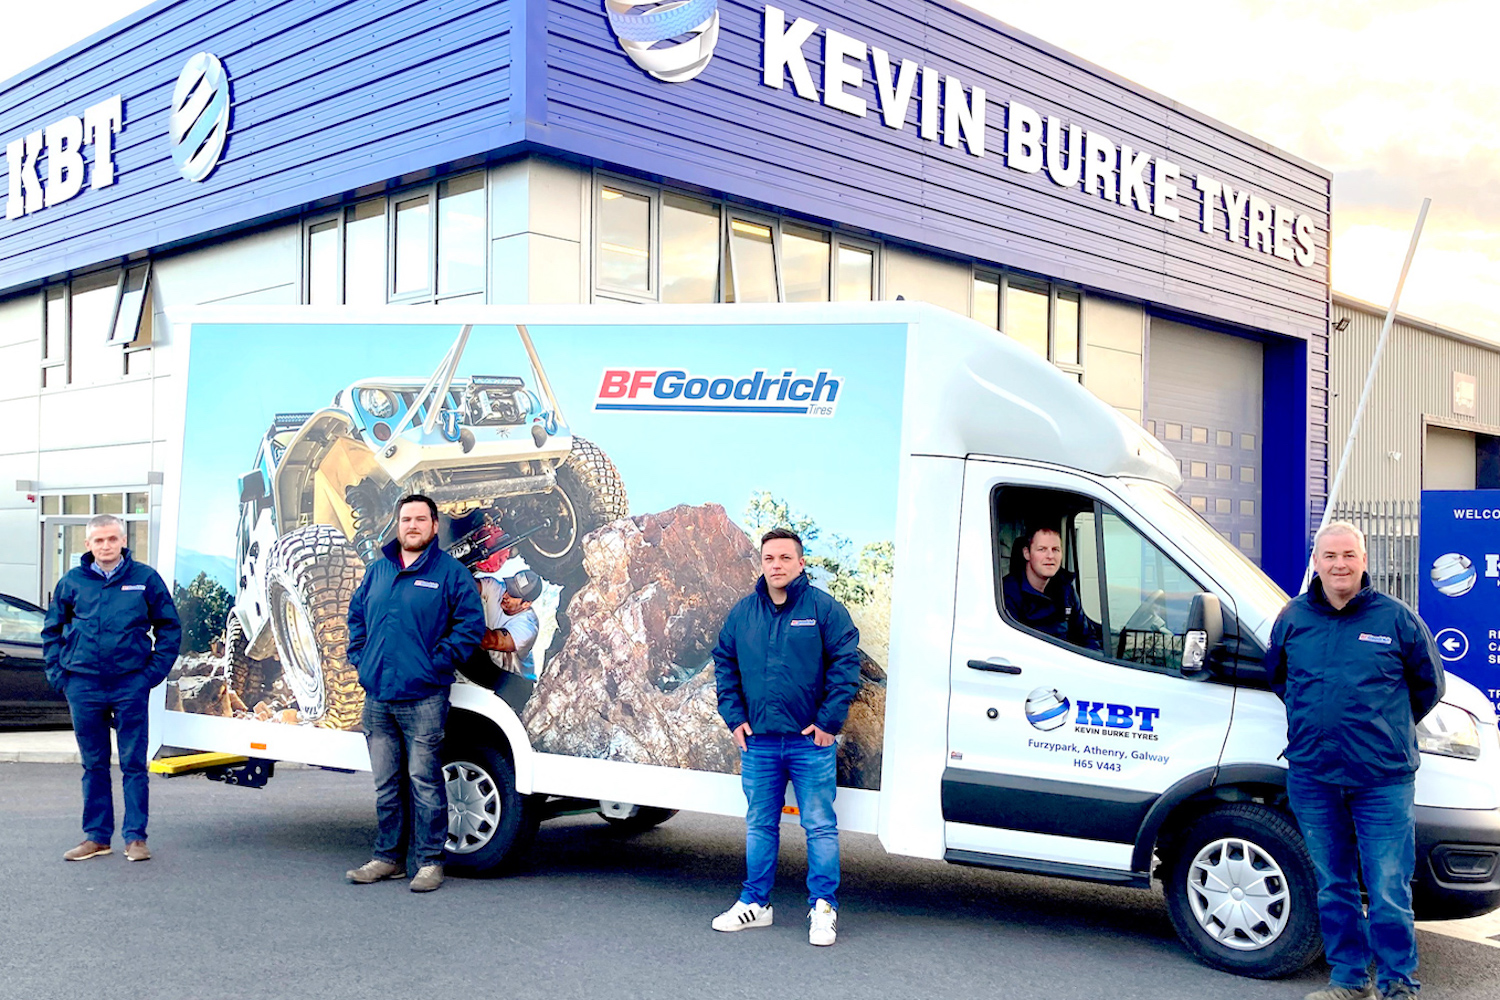 Car Industry News | Kevin Burke Tyres signs BF Goodrich contract | CompleteCar.ie